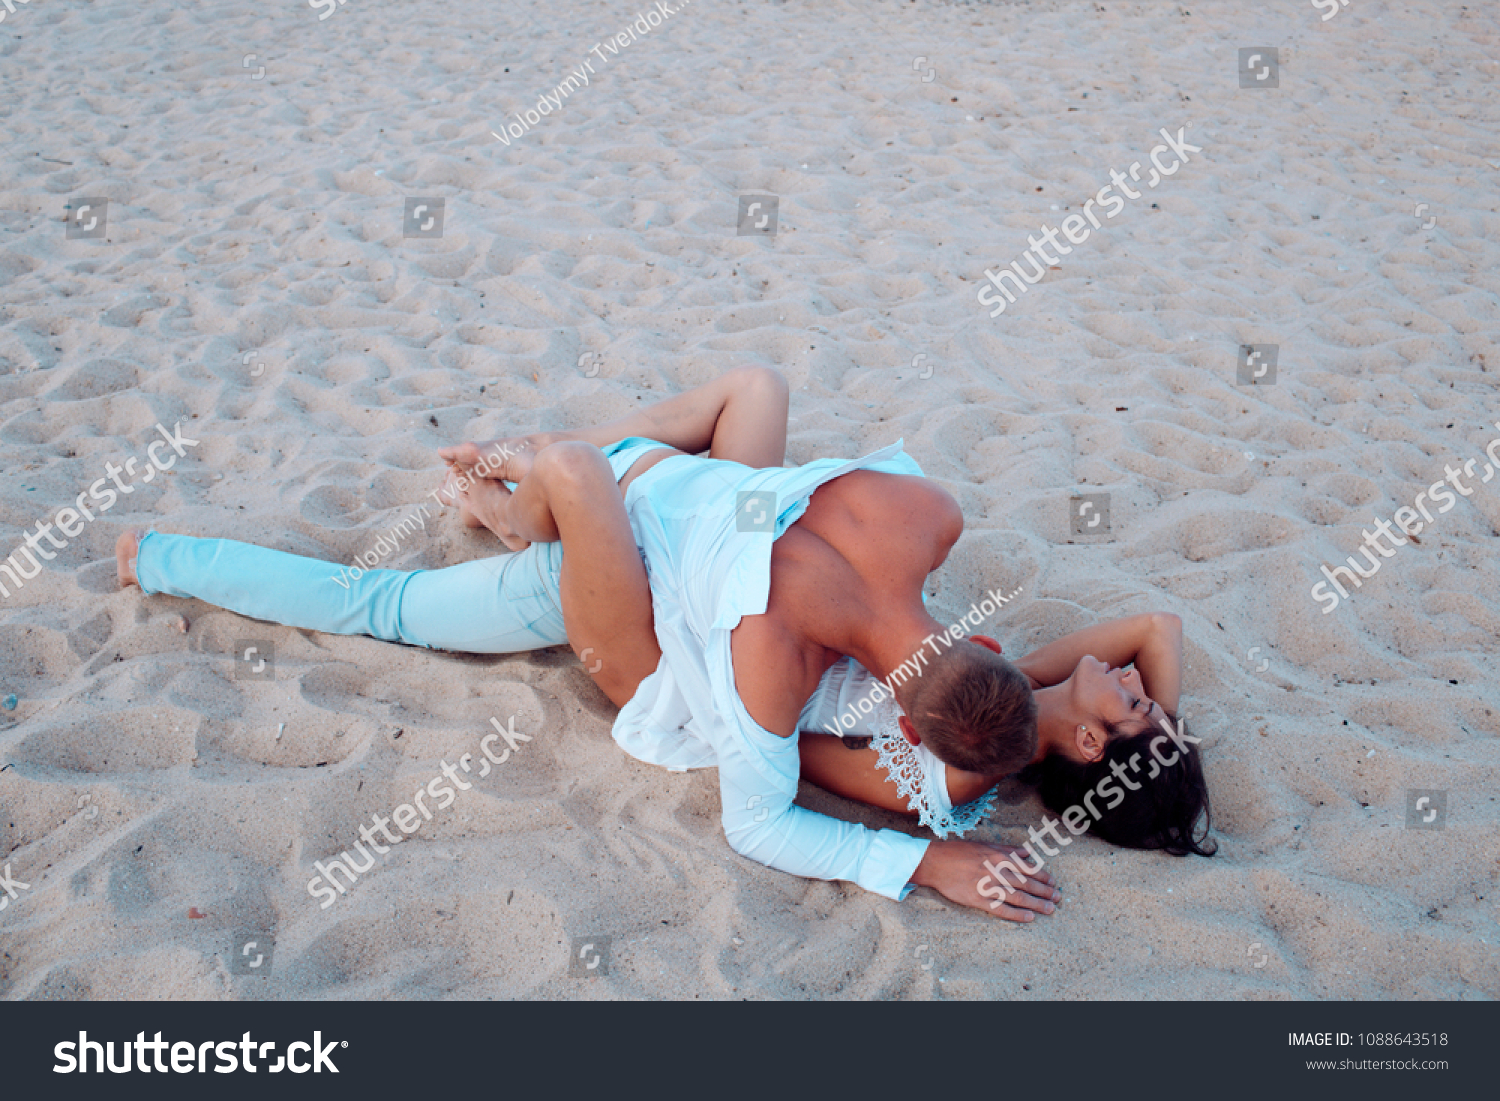 arnold escobar recommends beach sex images pic